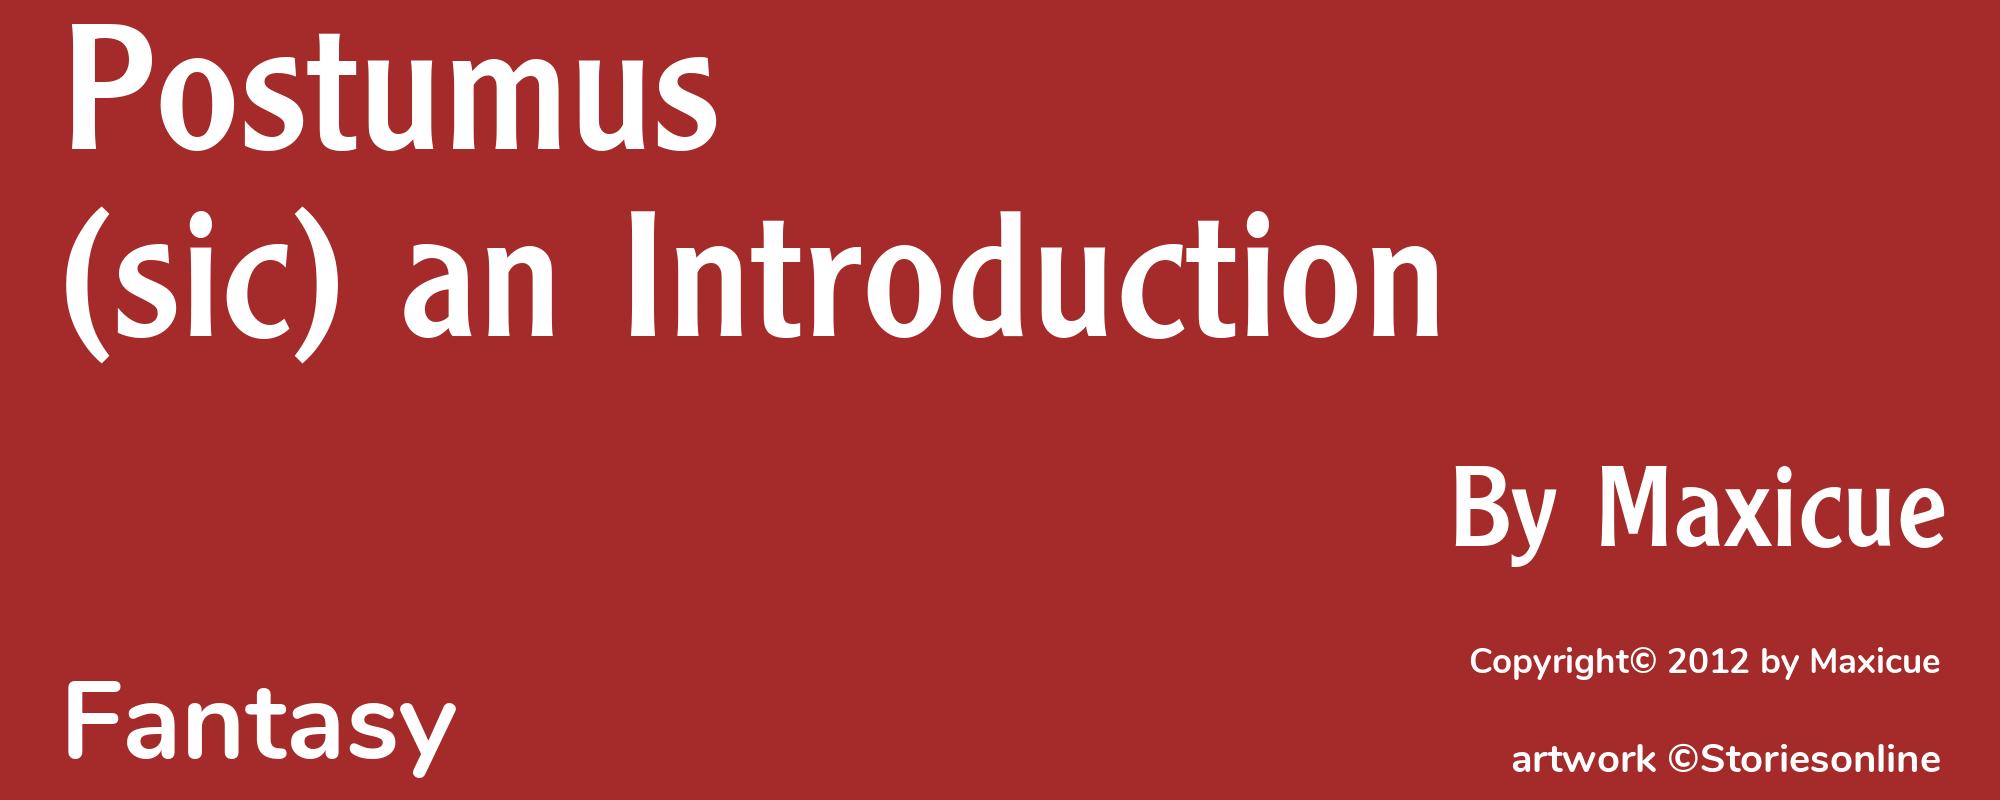 Postumus (sic) an Introduction - Cover